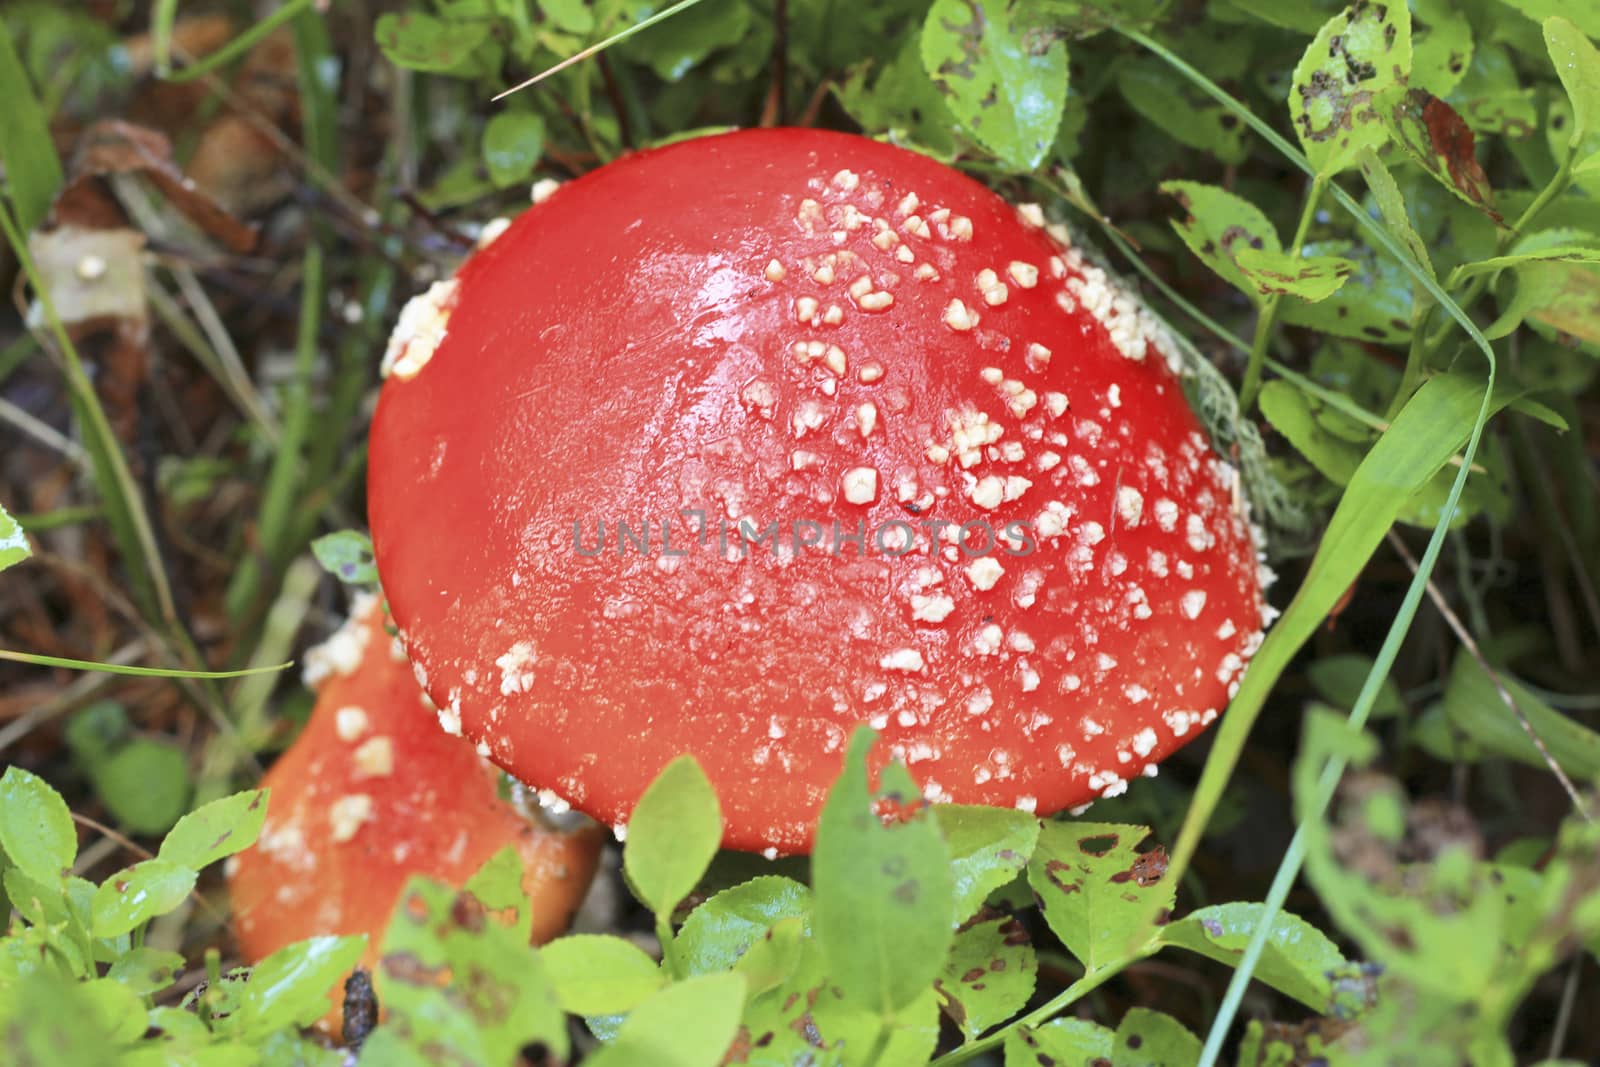 Red toadstool mushroom growing in autumnal forest by scullery